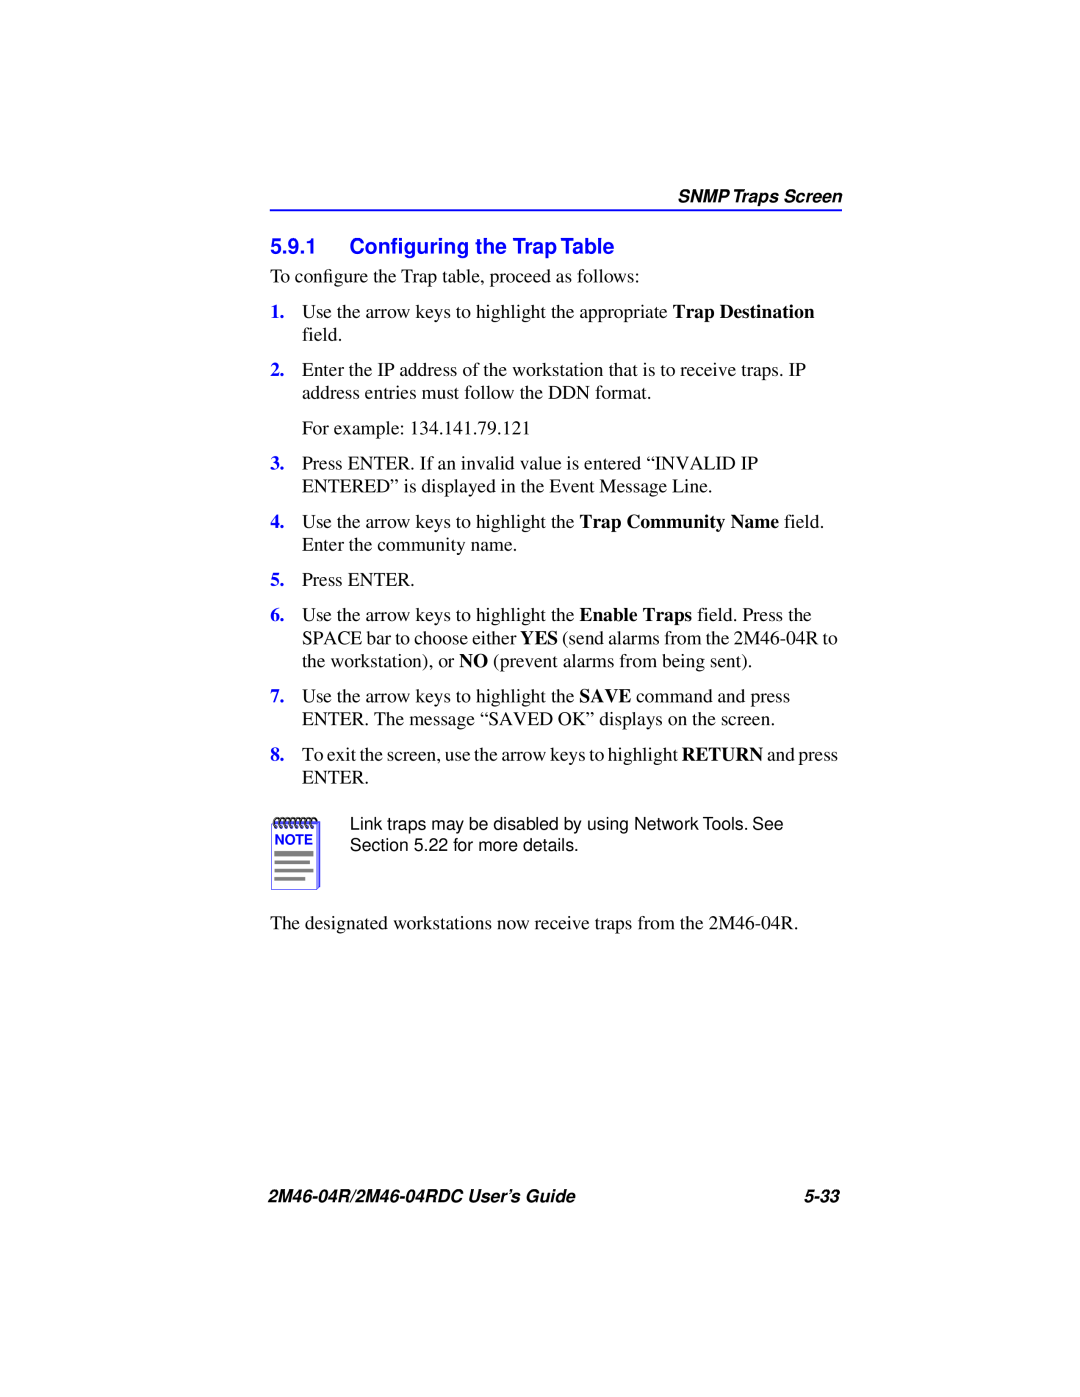 Cabletron Systems pmn manual 5.9.1 Conﬁguring the Trap Table 